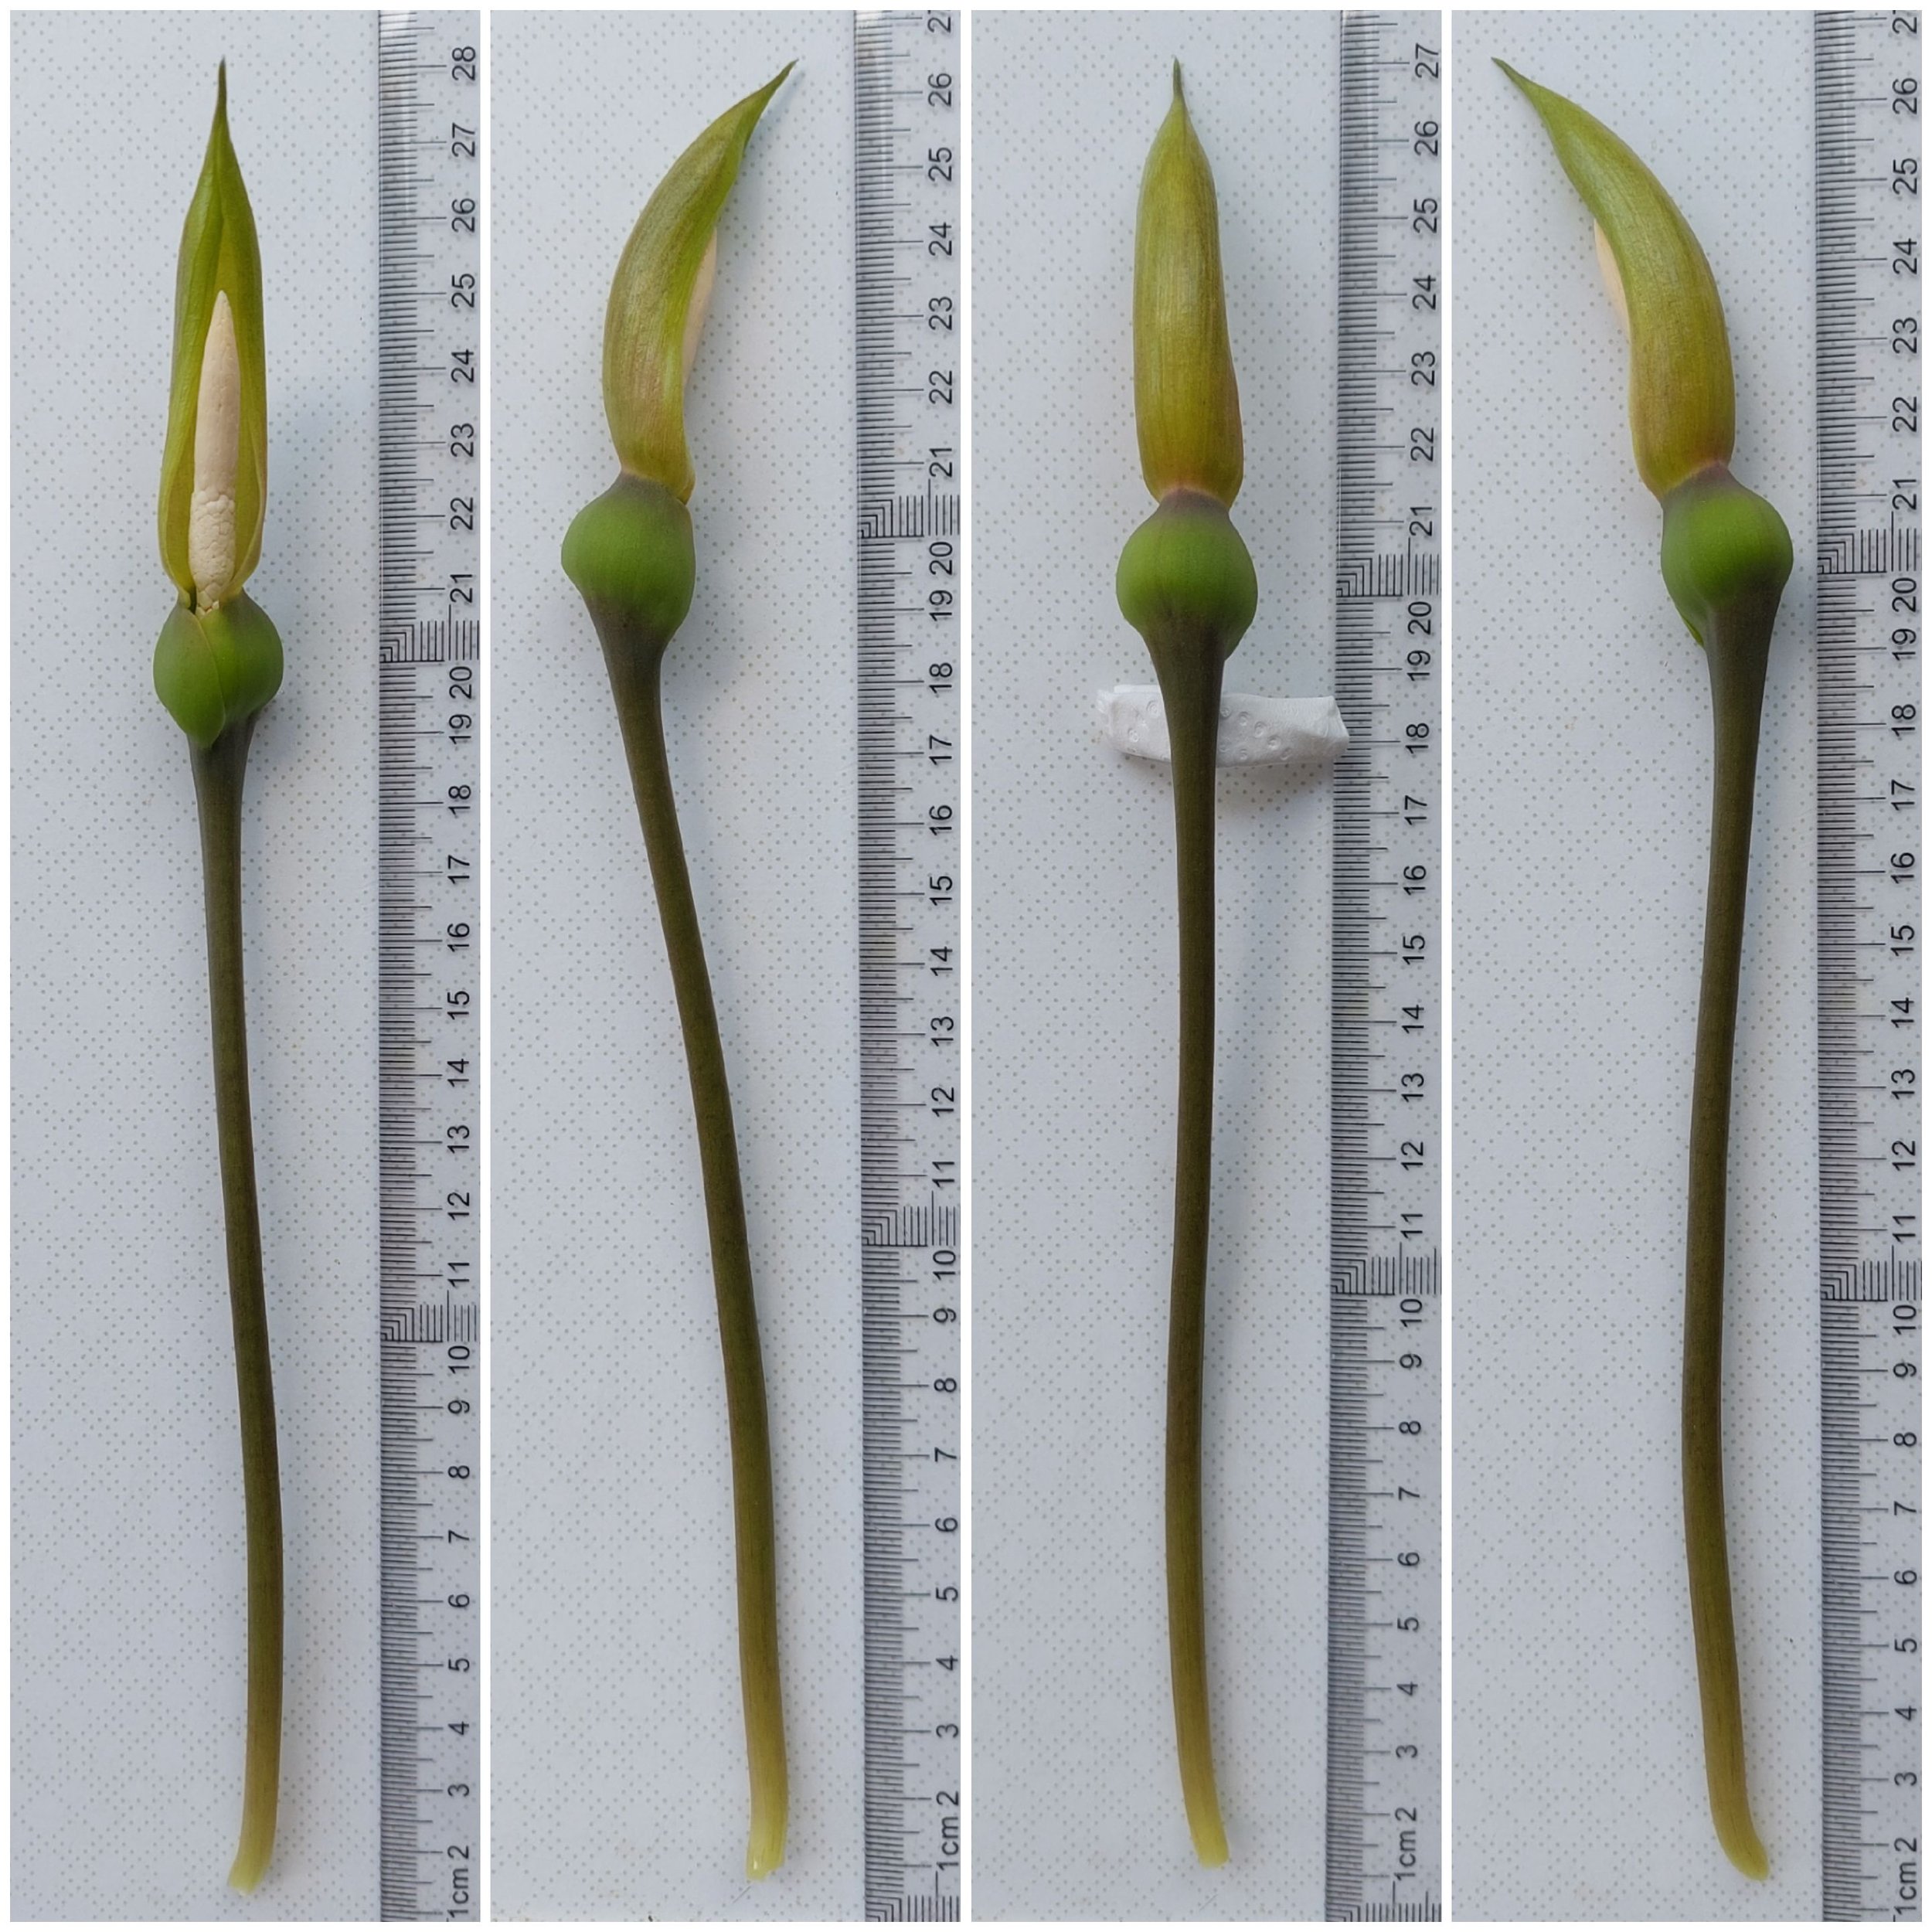 diff. angles of inflorescence.jpg